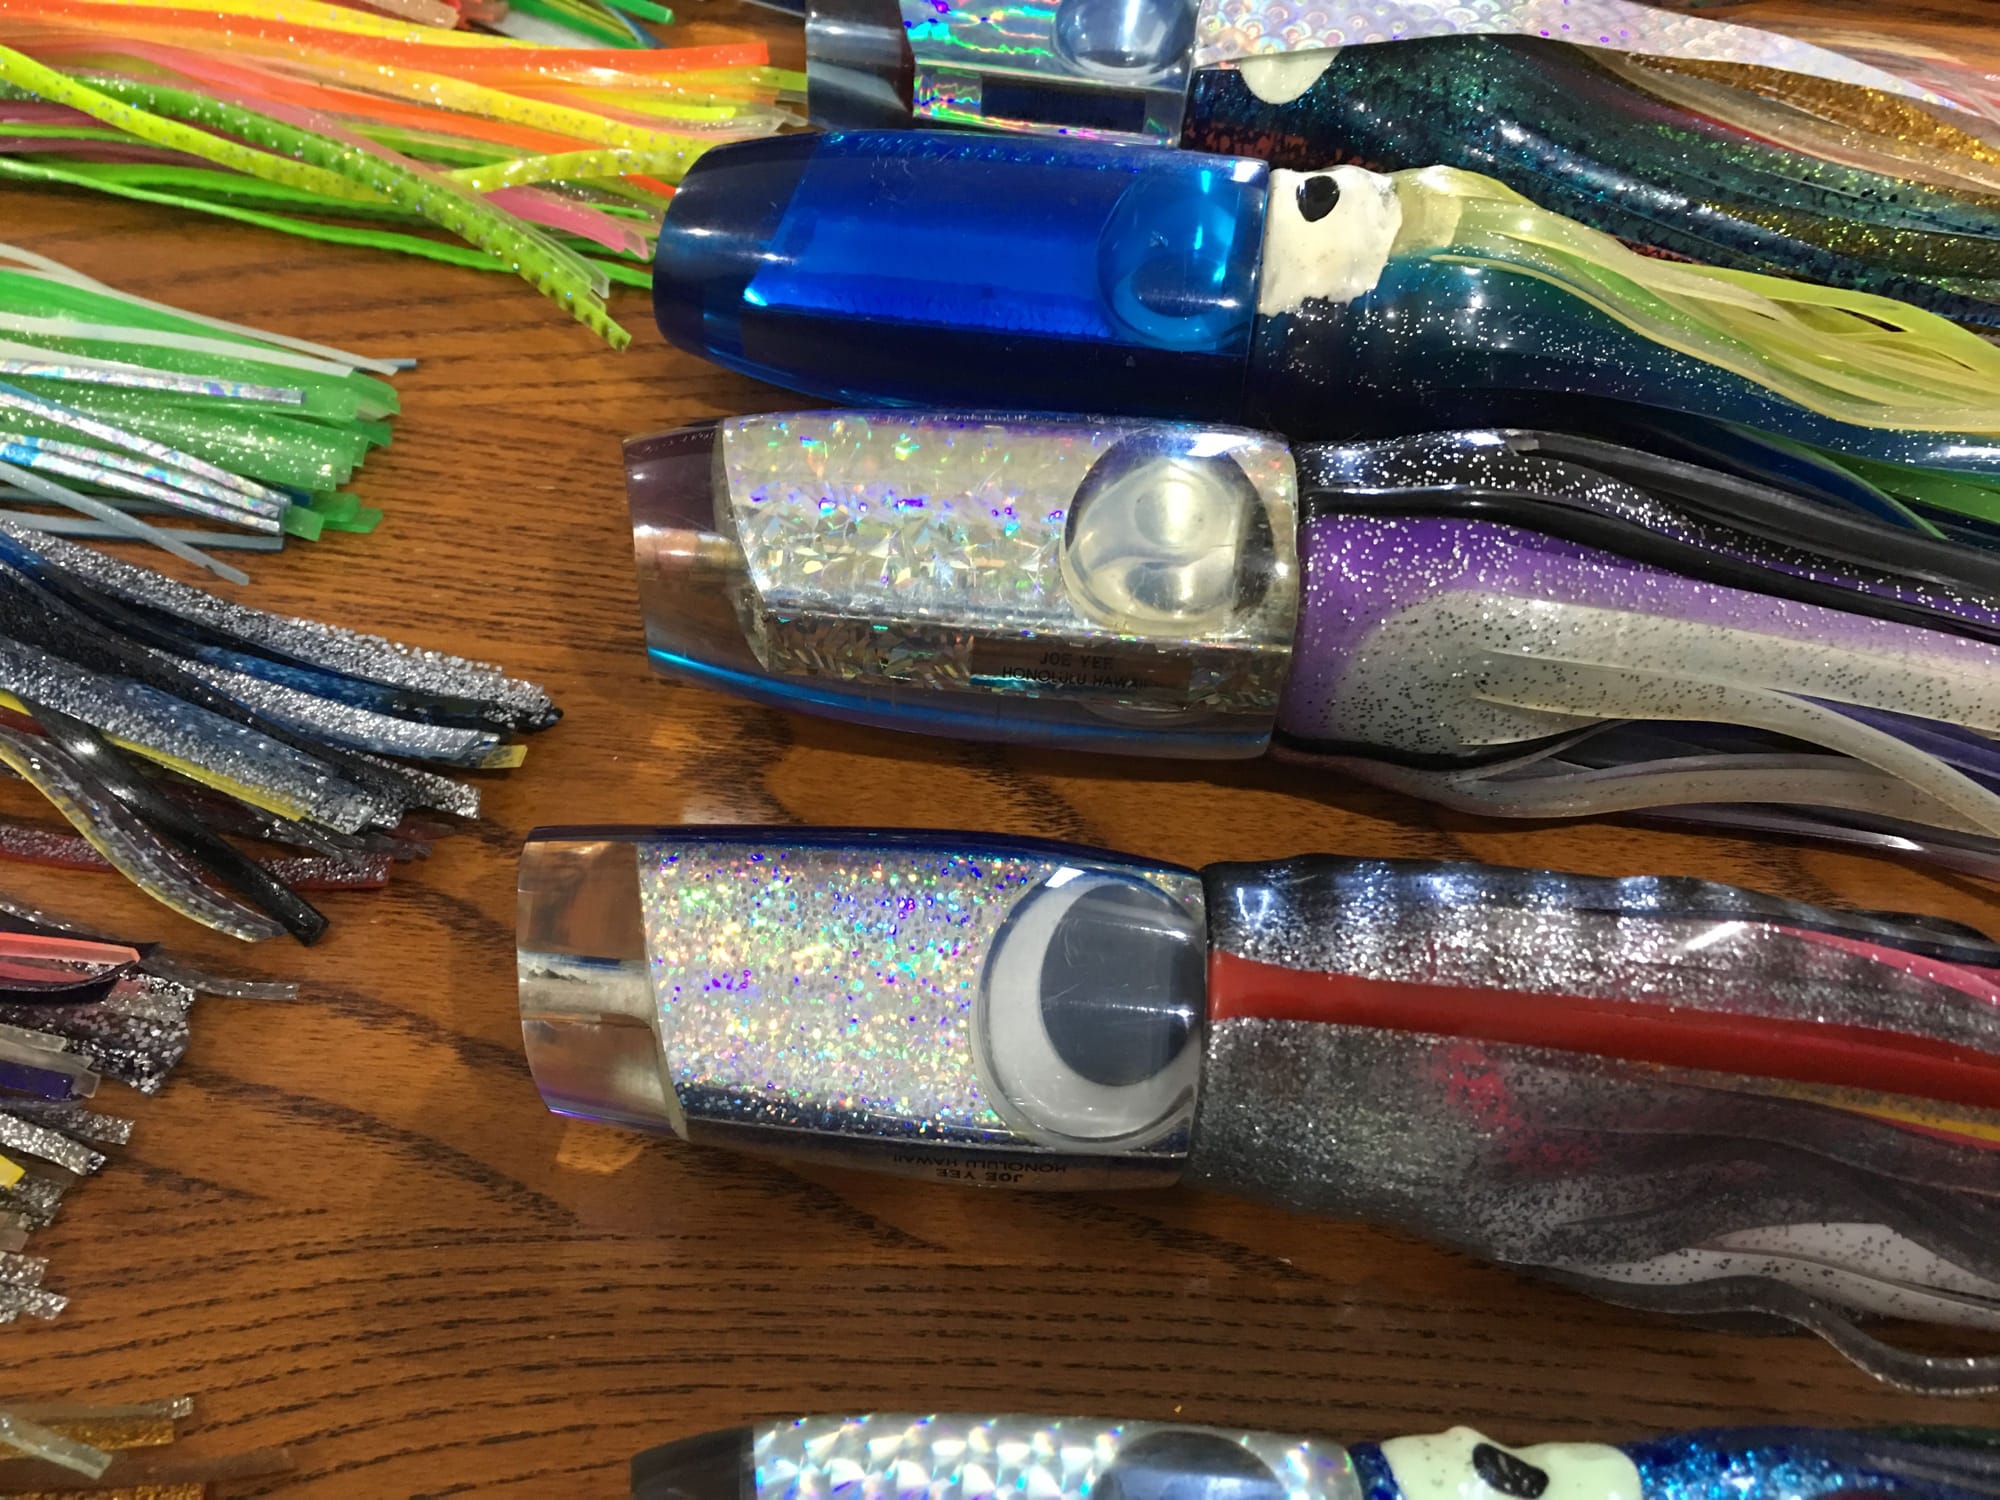 Entire Joe Jee collection - over 40 lures for sale - The Hull Truth -  Boating and Fishing Forum